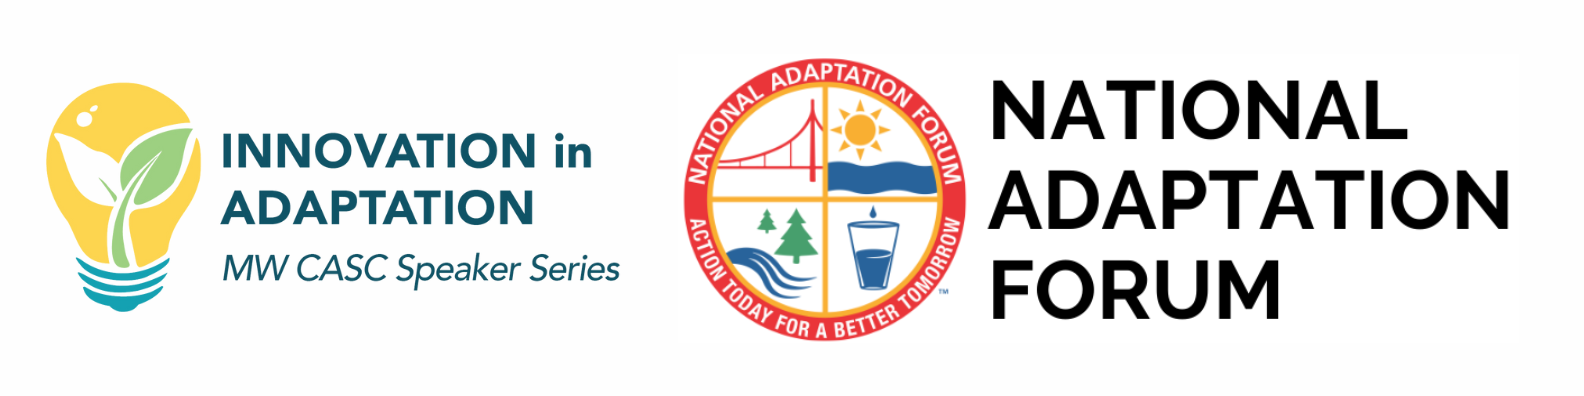 Innovation in Adaptation and National Adaptation Forum logos on a white background